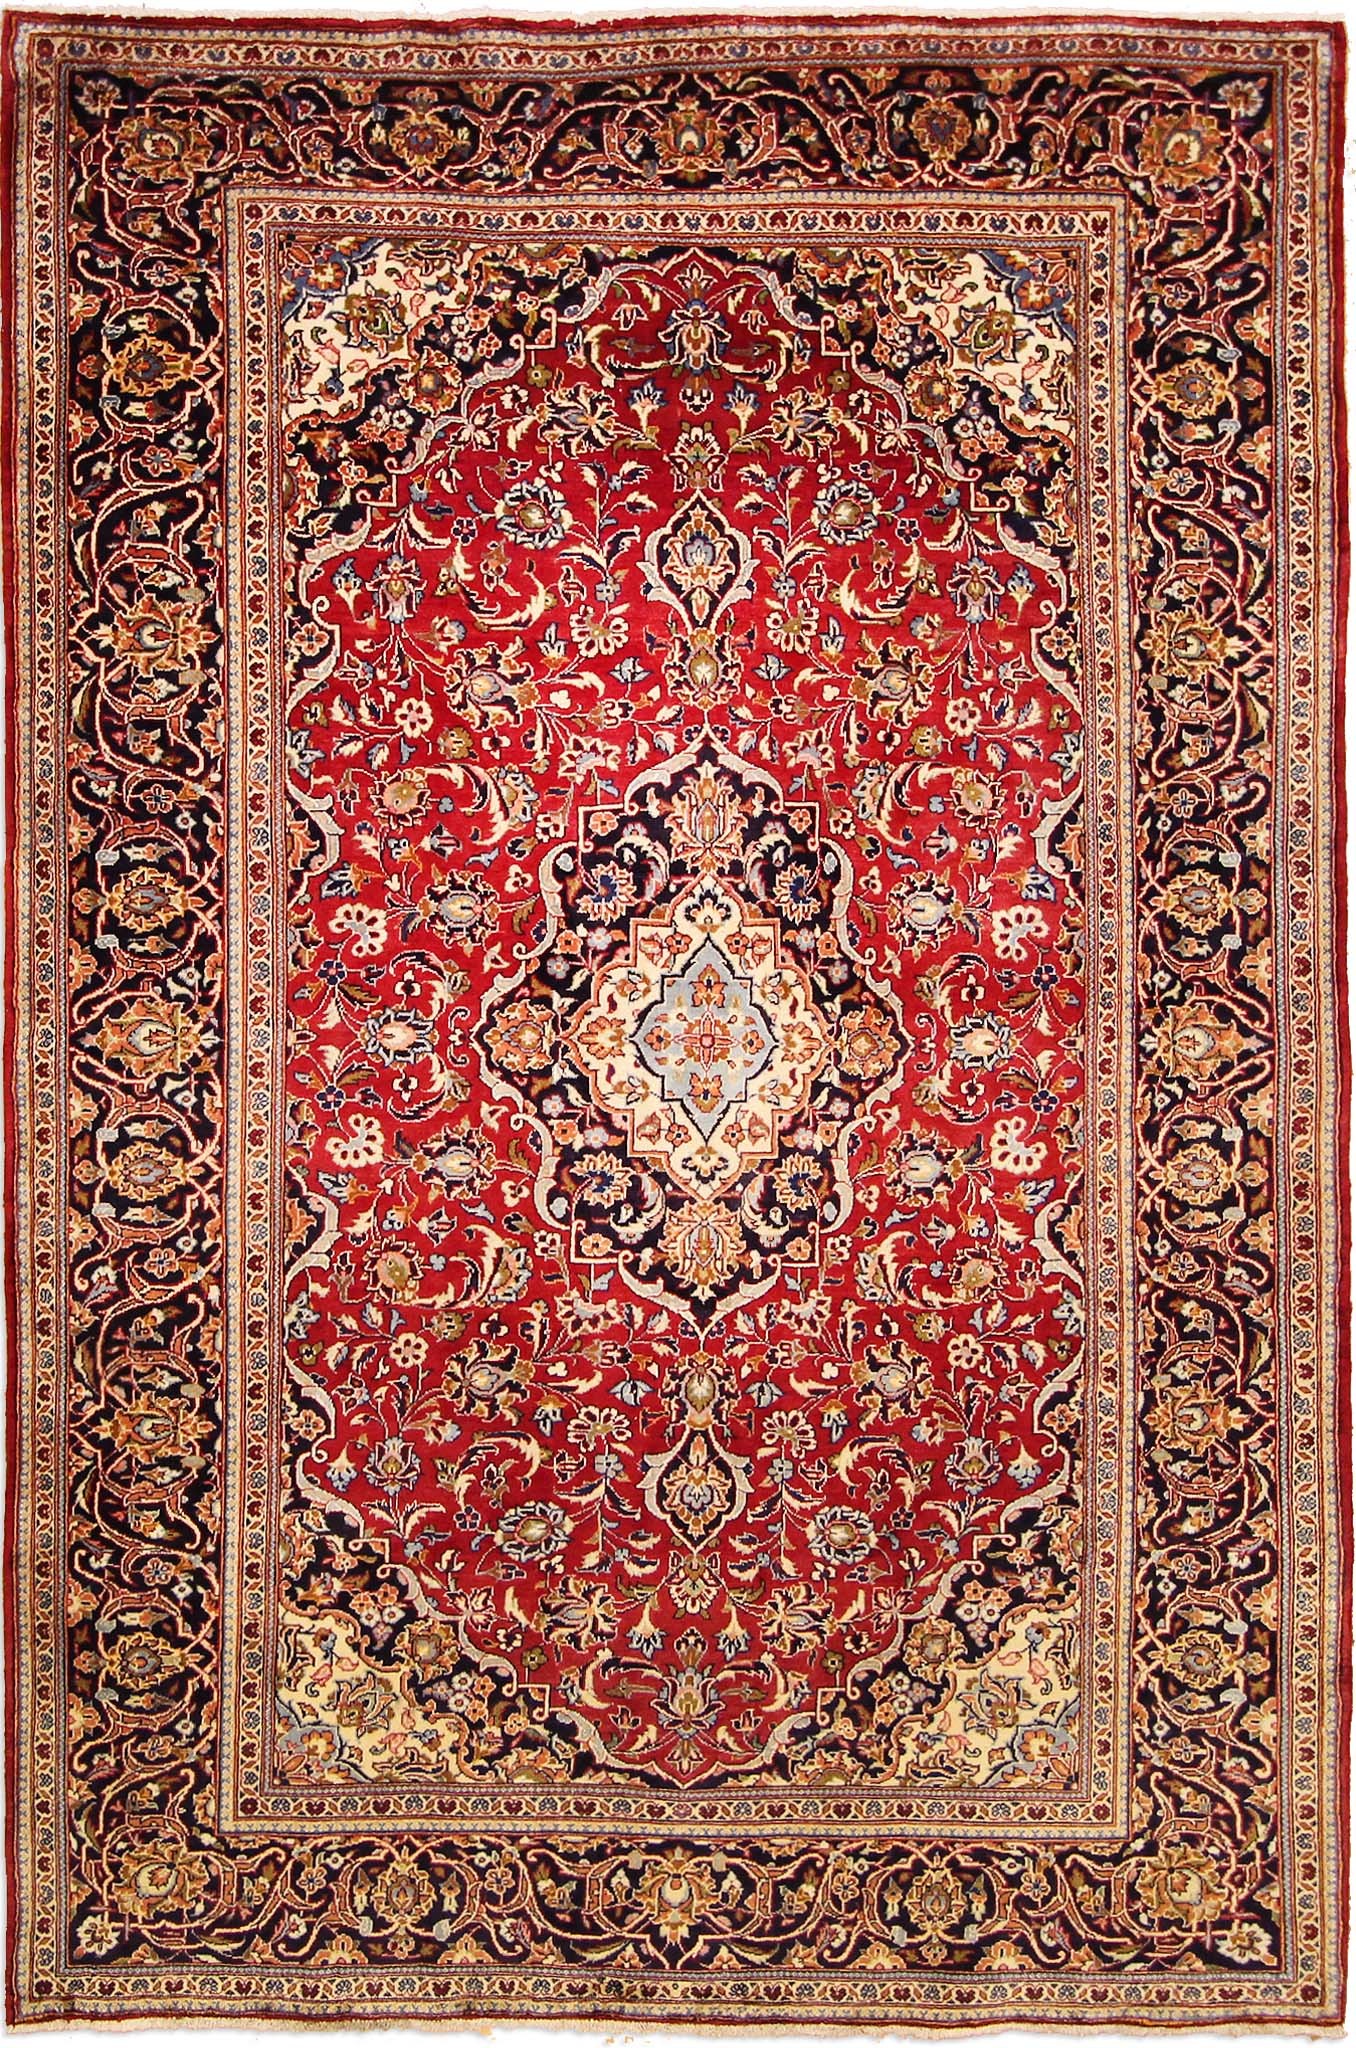 An Authentic Persian Rug Is A Handmade Carpet That Either Knotted